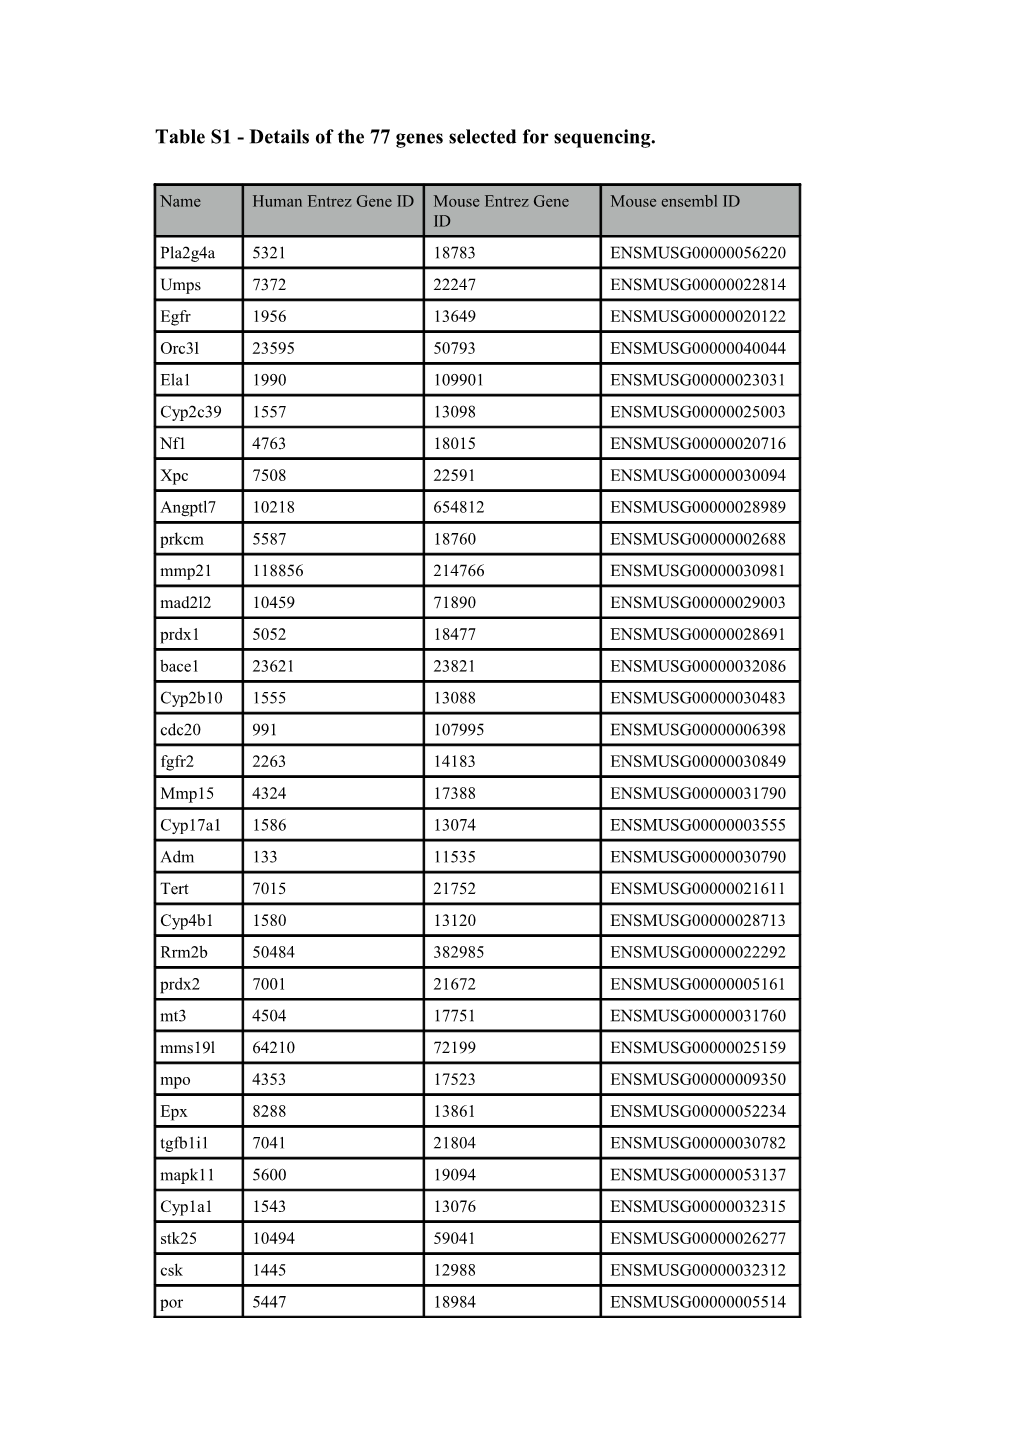 Table S1 - Details of the 77 Genes Selected for Sequencing